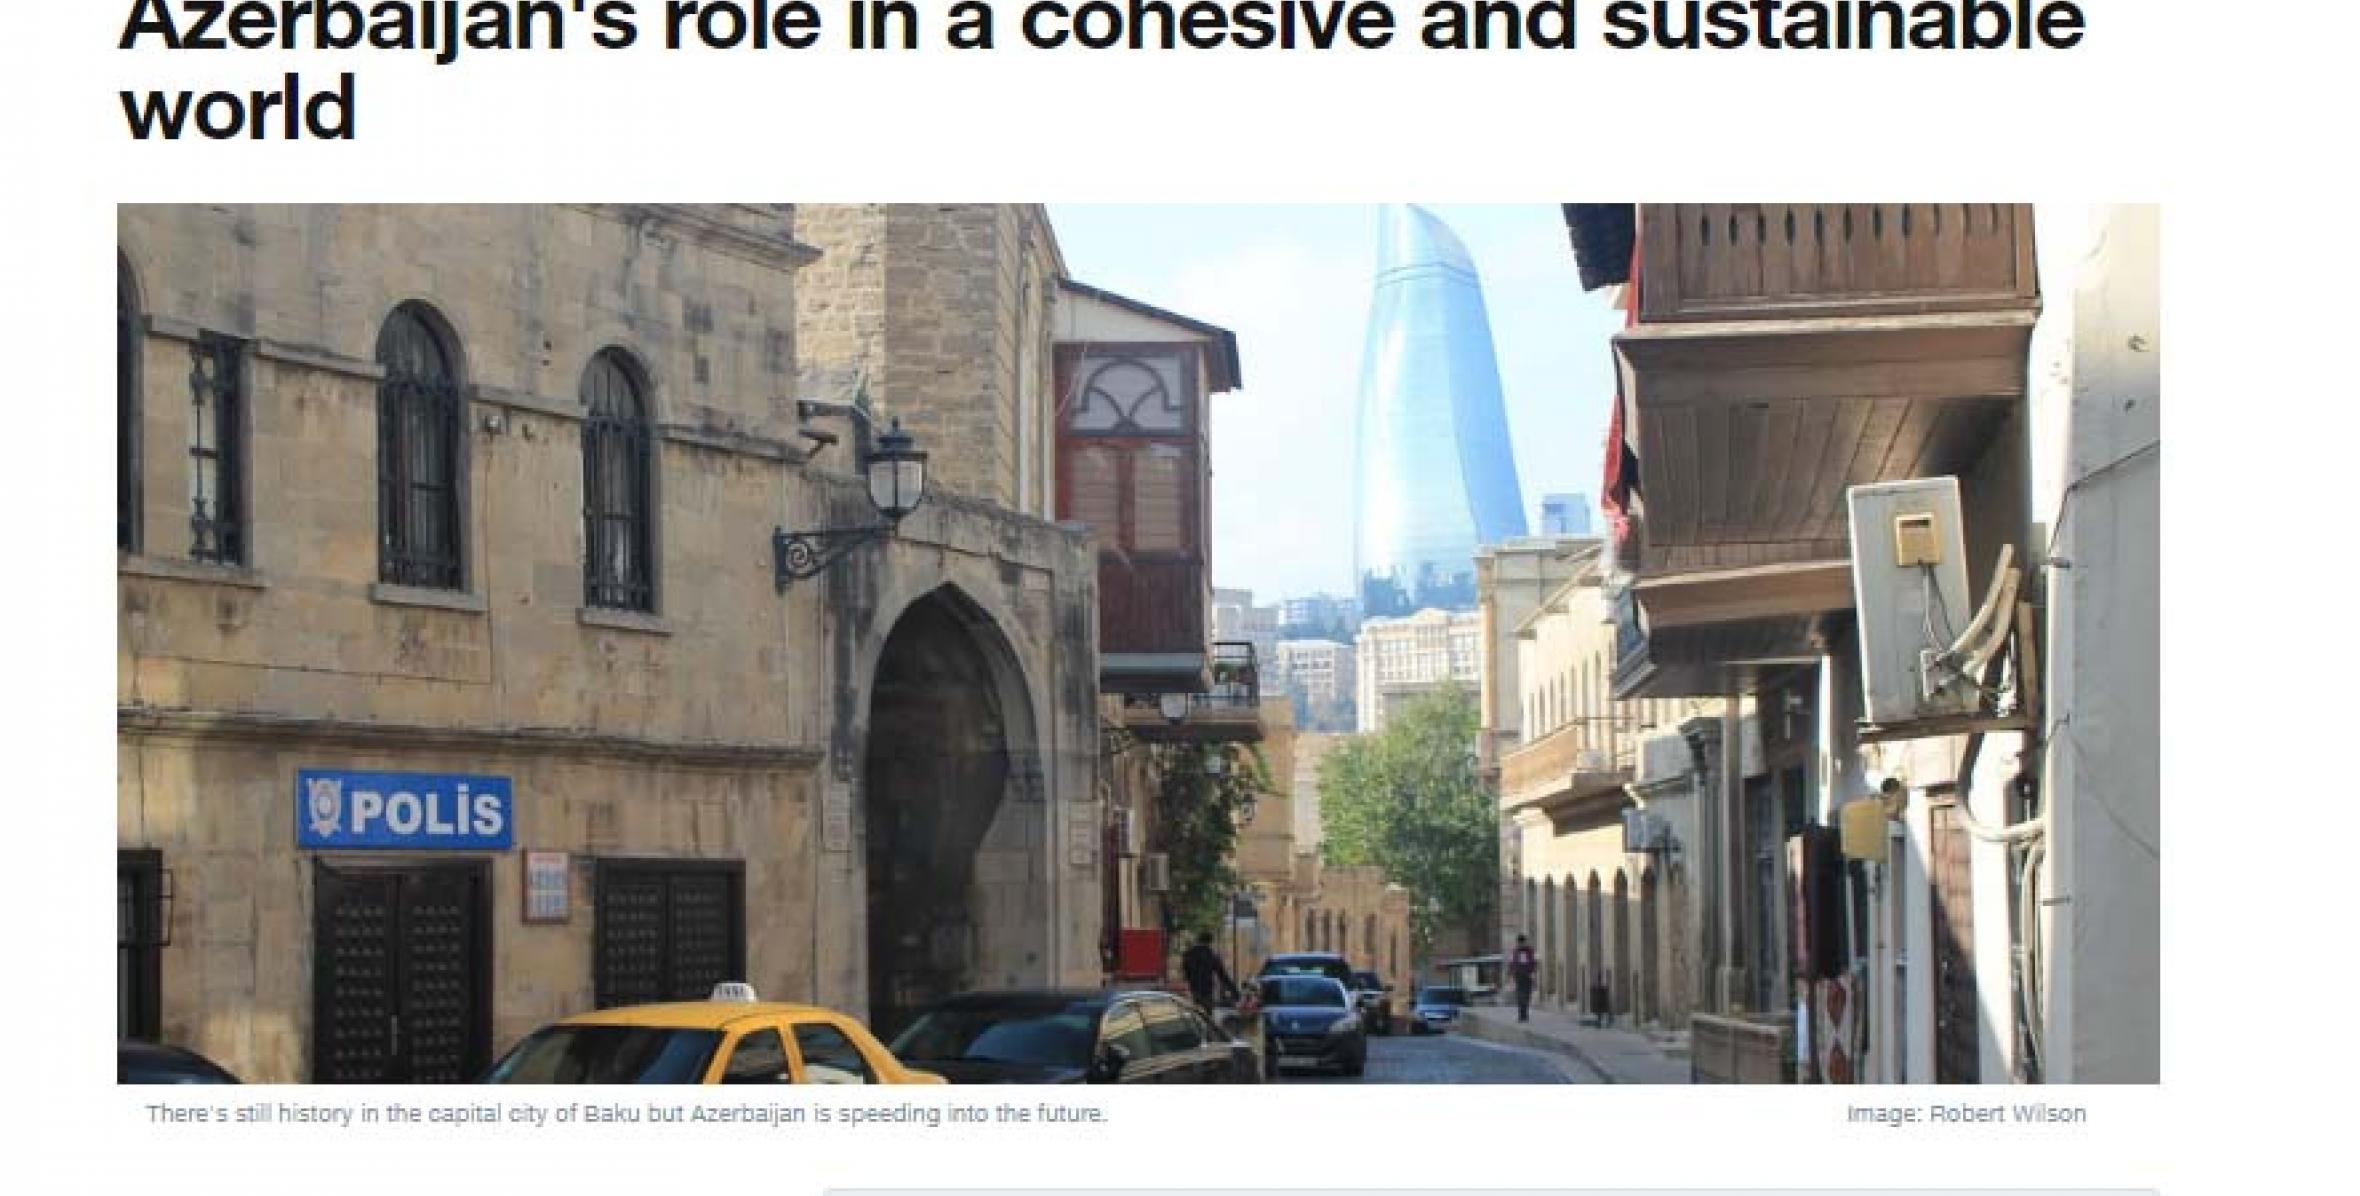 The official website of the World Economic Forum has published an article by Ilham Aliyev headlined “Azerbaijan's role in a cohesive and sustainable world”